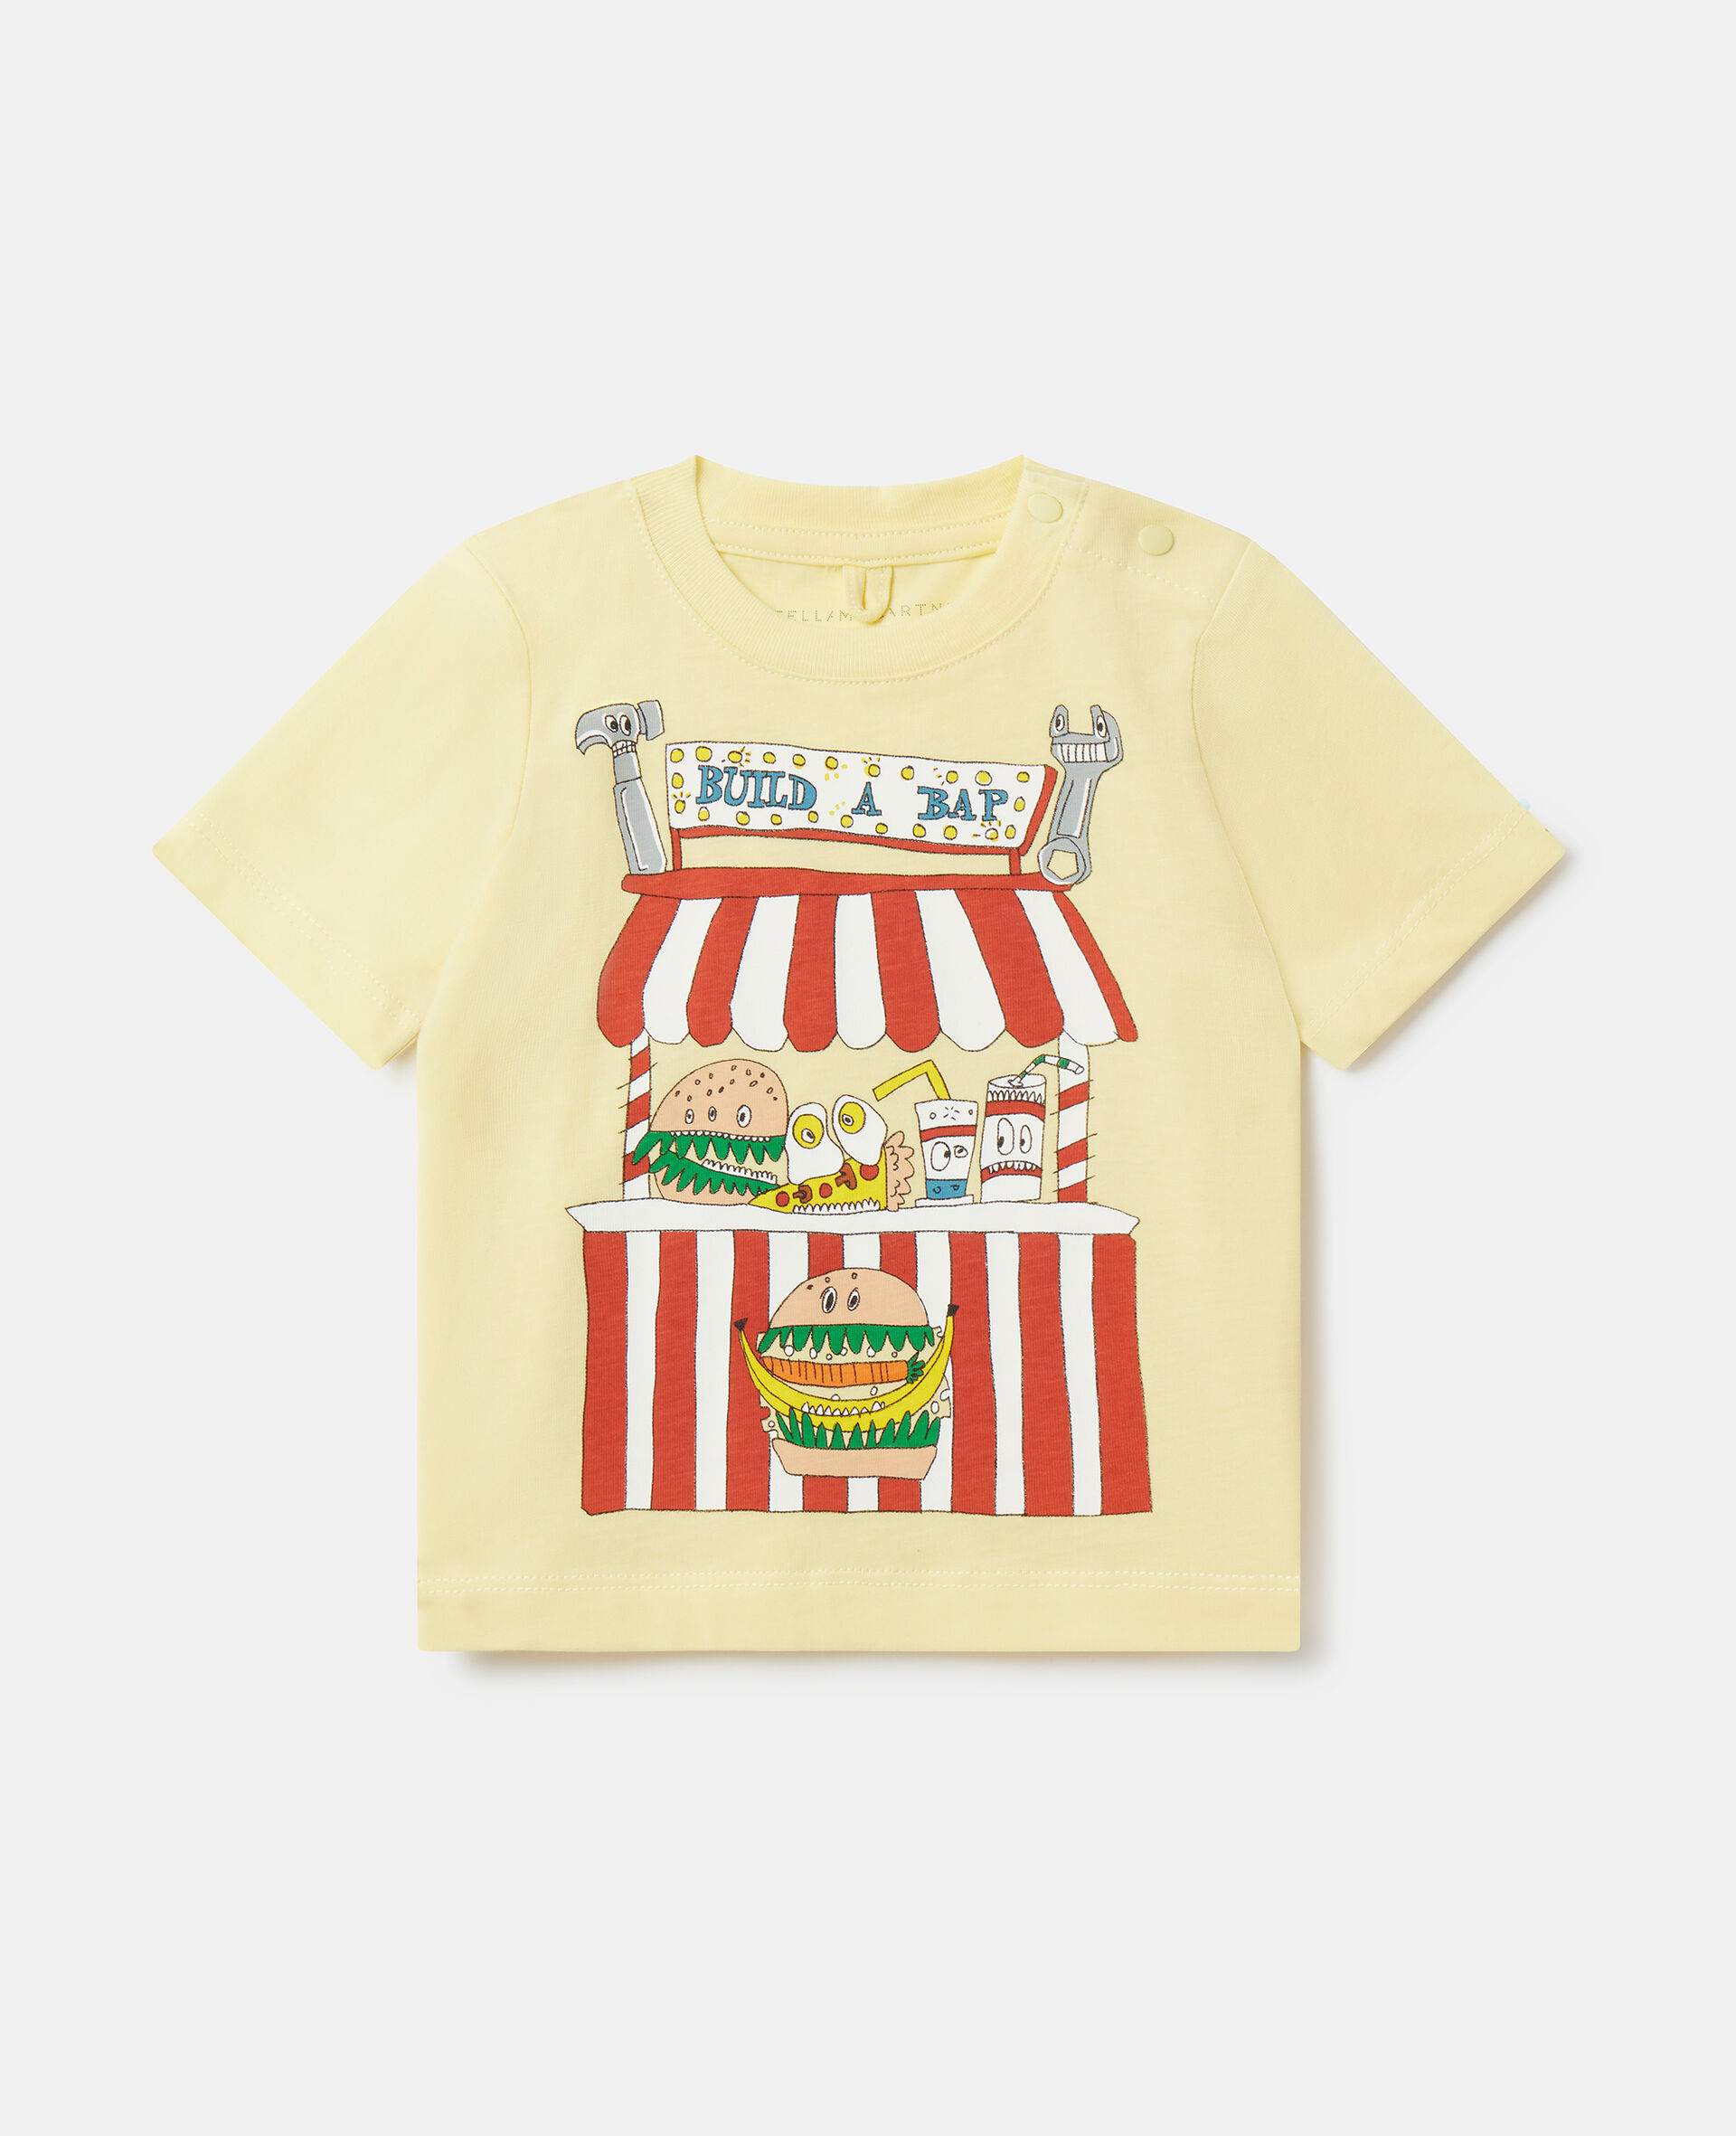 'Build A Bap' Stall T-Shirt-Multicolour-large image number 0